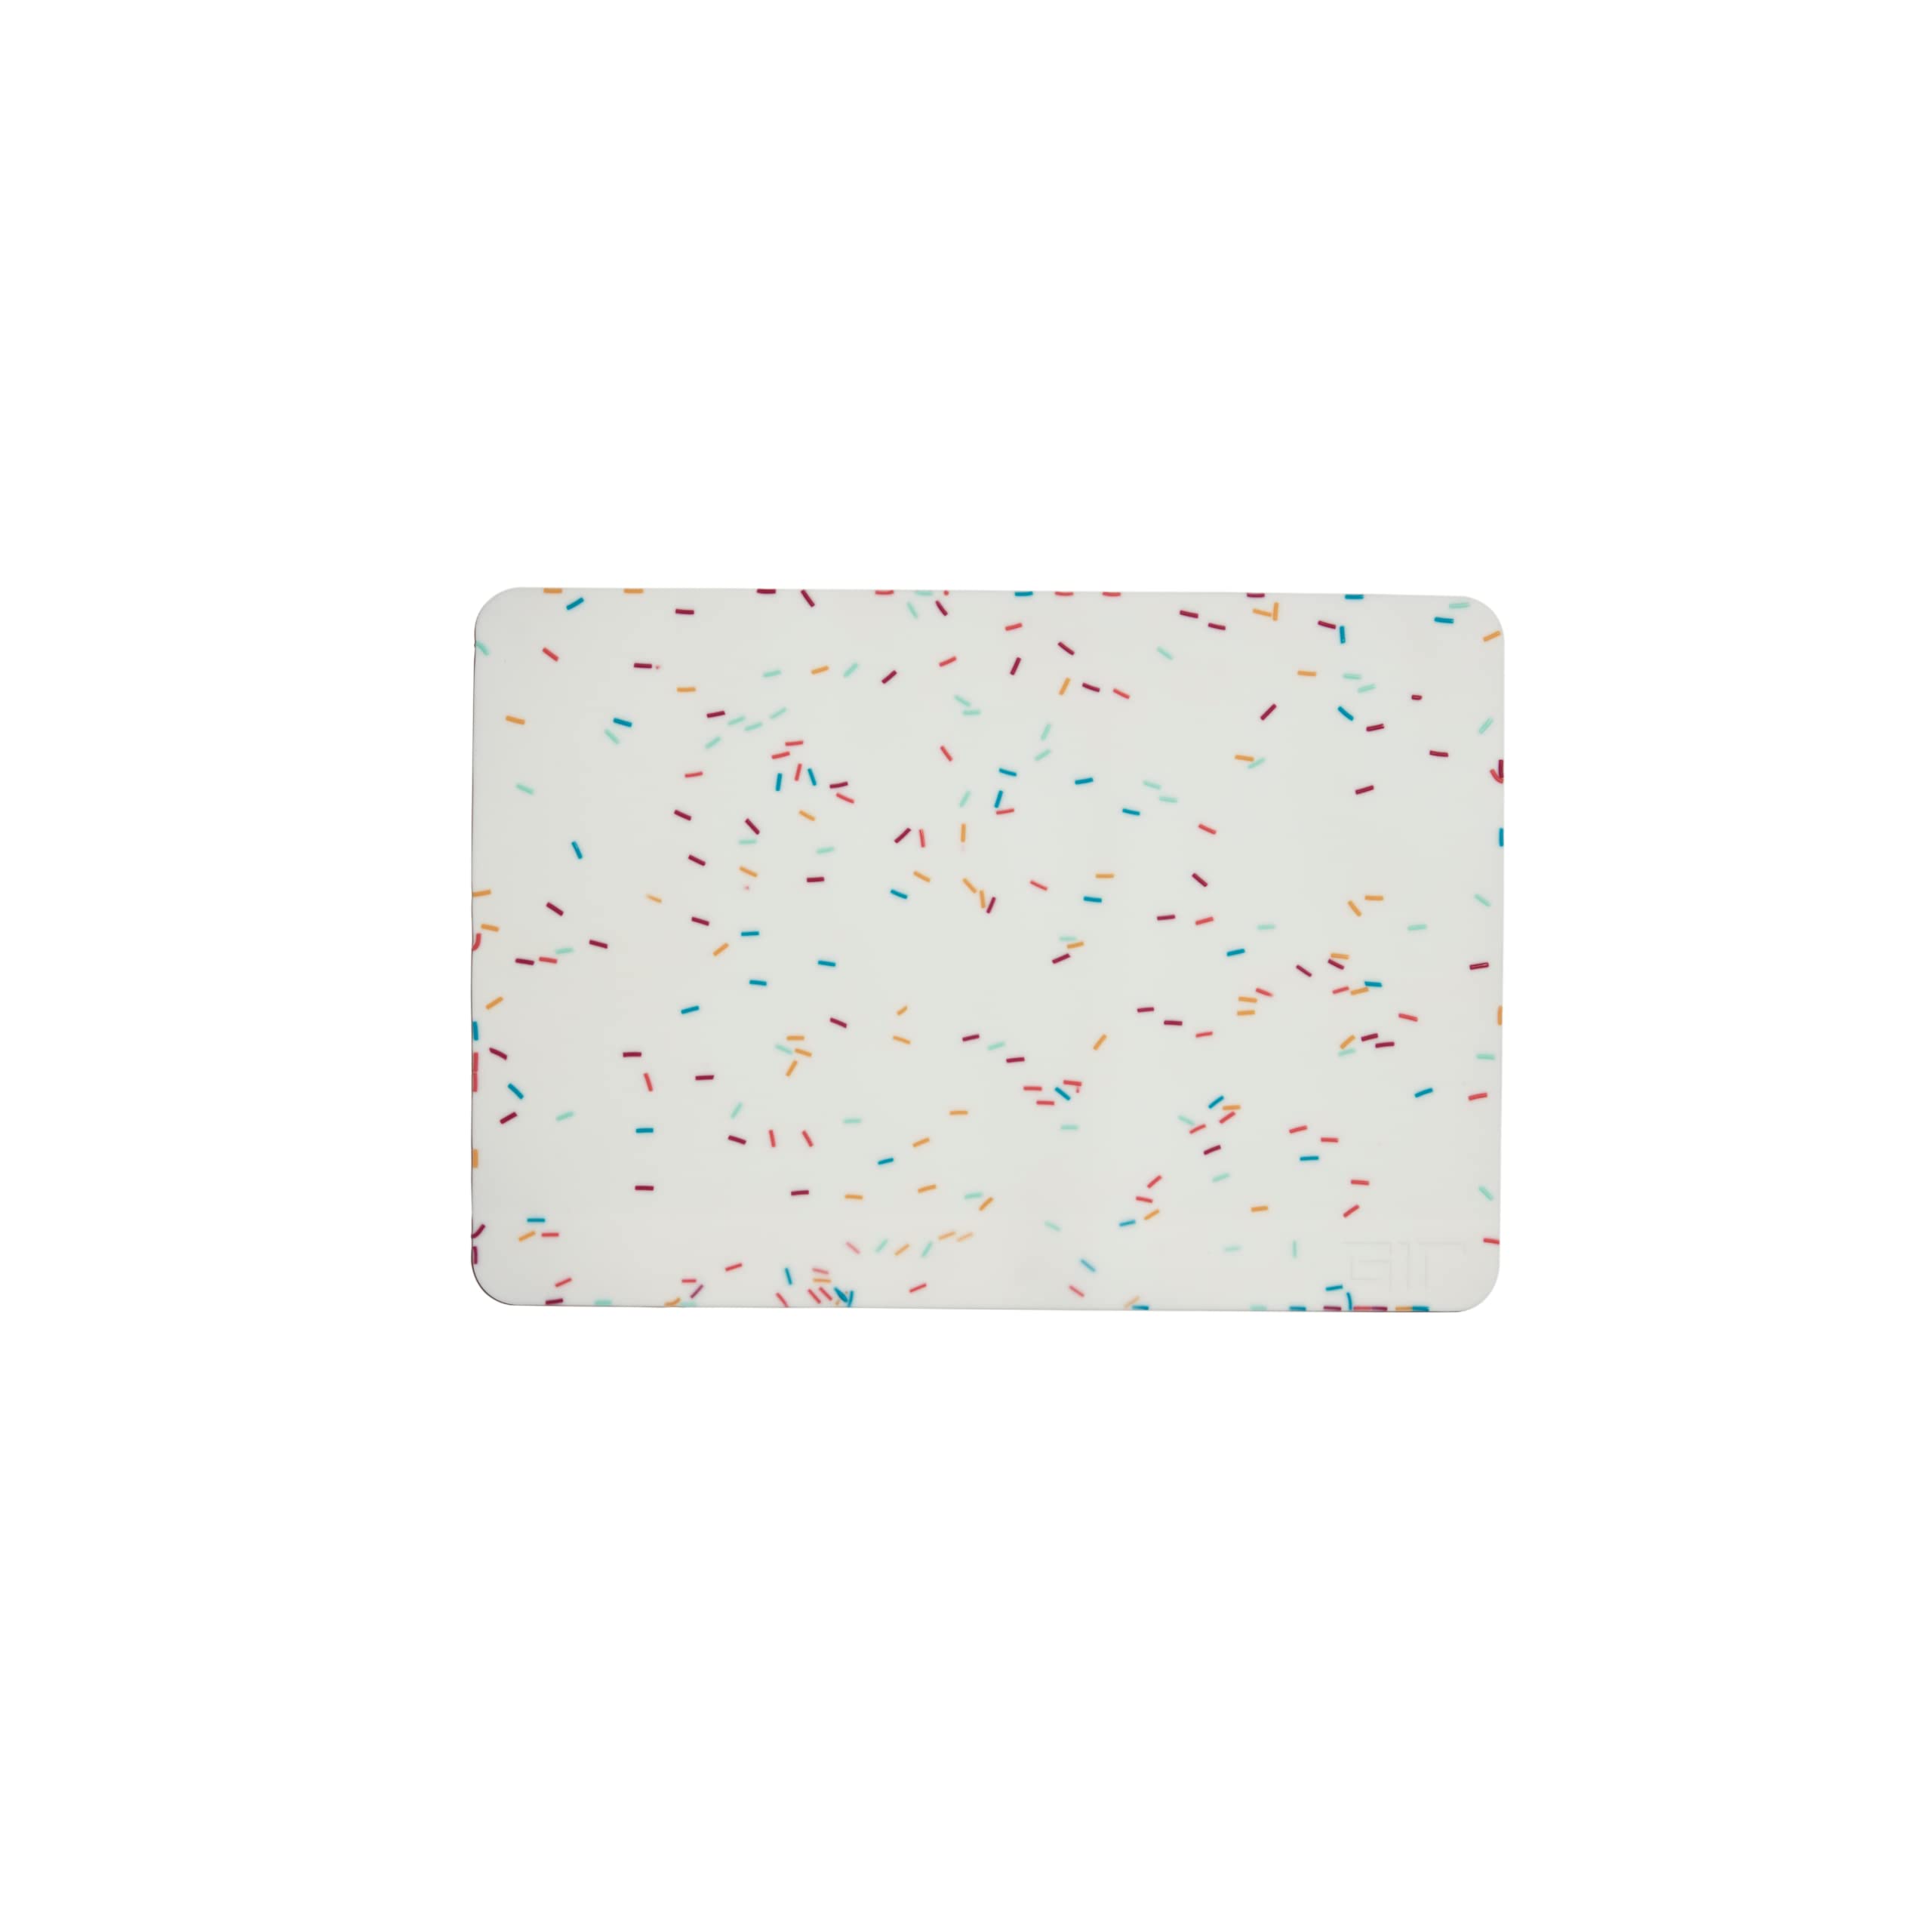 GIR: Get It Right Premium Silicone Baking Mat - Non-Stick, Heat Resistant for Cooking, and Baking Quarter Sheet - 9 x 12, Sprinkles (GIRBM2198SKL)